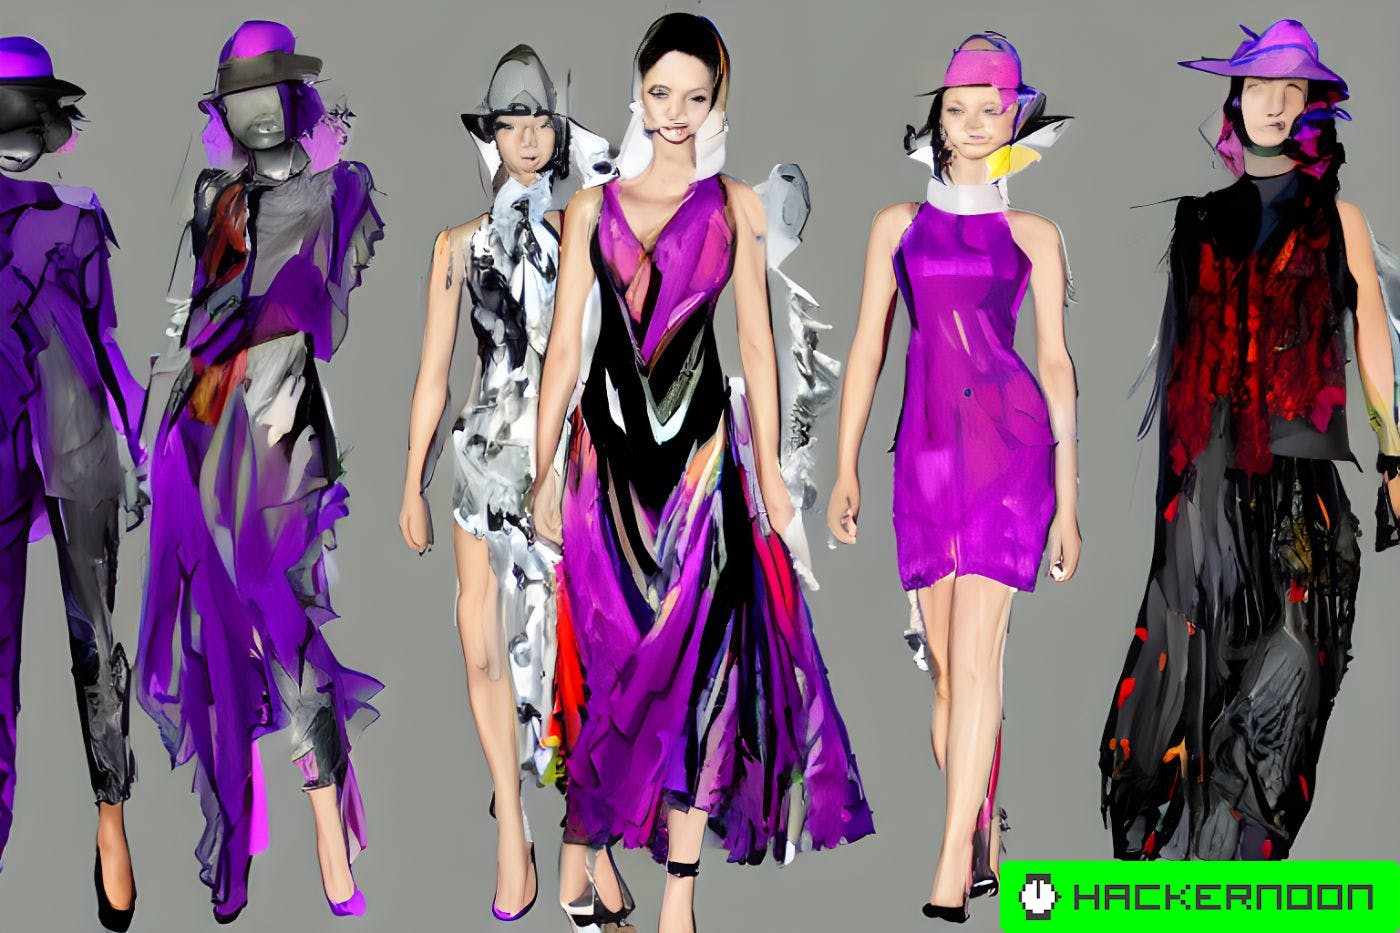 Metaverse Fashion Show Featuring Gucci, Louis Vuitton, and Burberry 